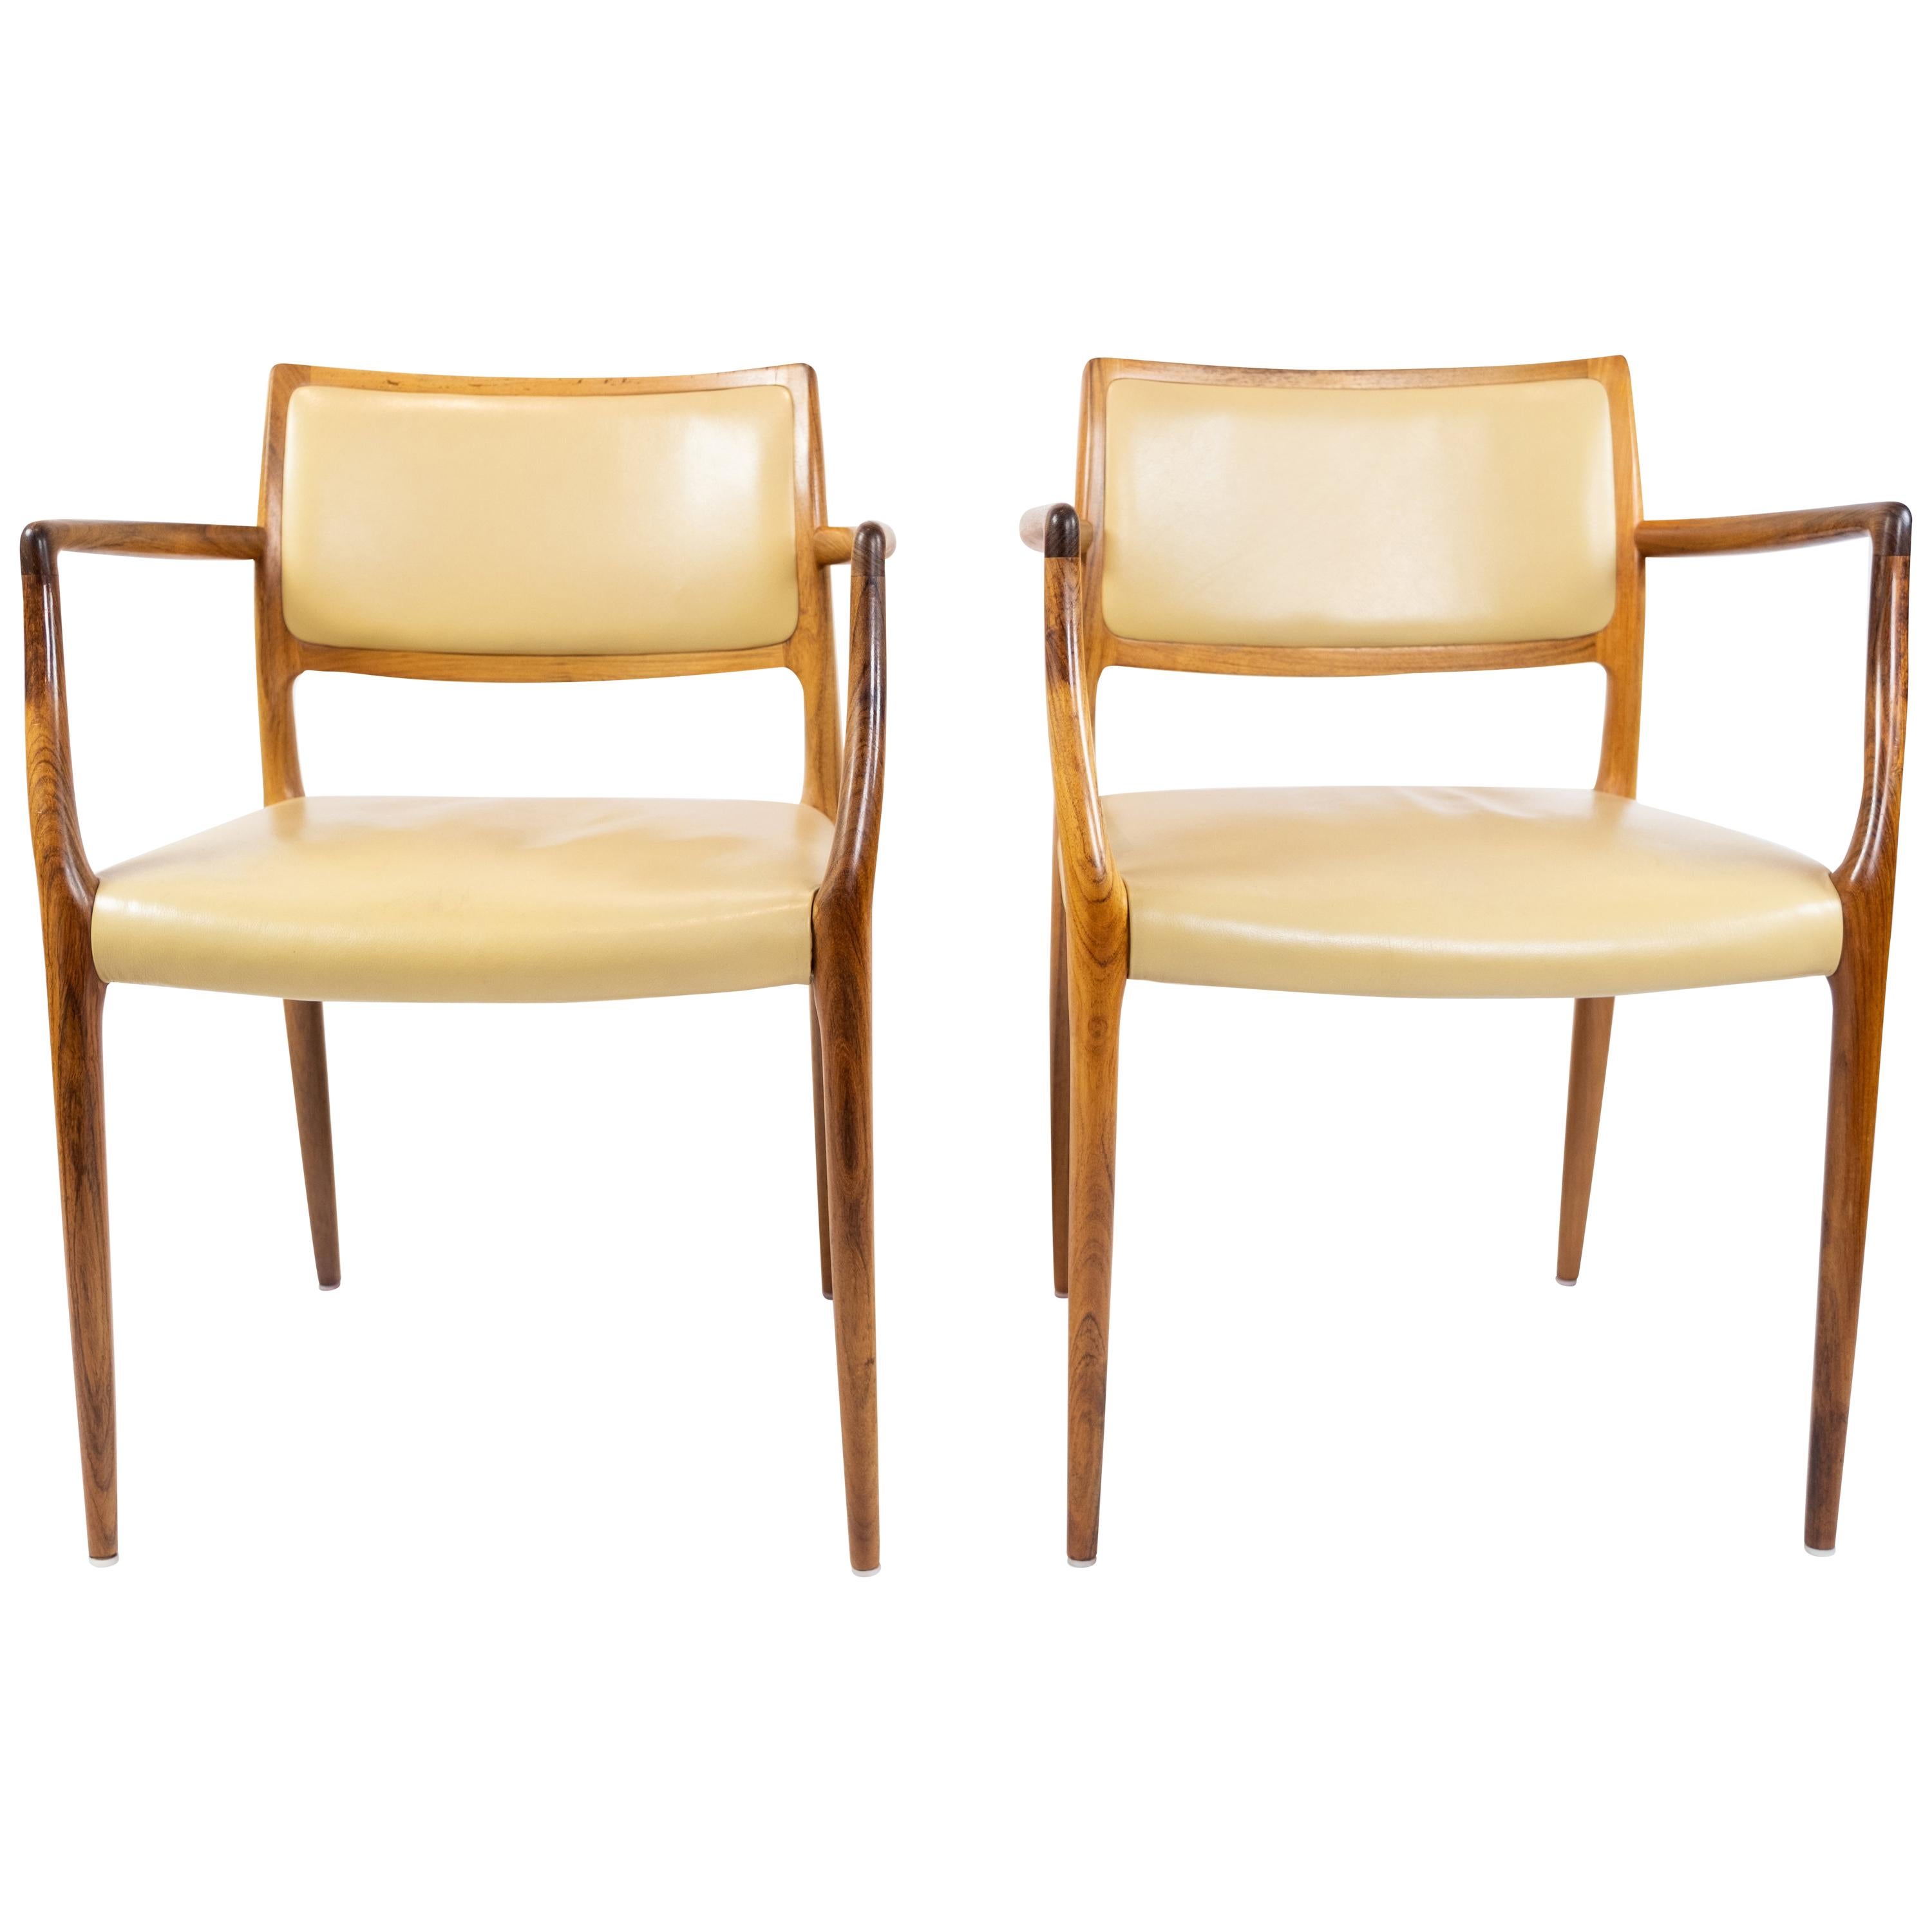 A Pair Of 2 Armchairs Model 65 Made In Rosewood By Niels O. Møller From 1968s For Sale